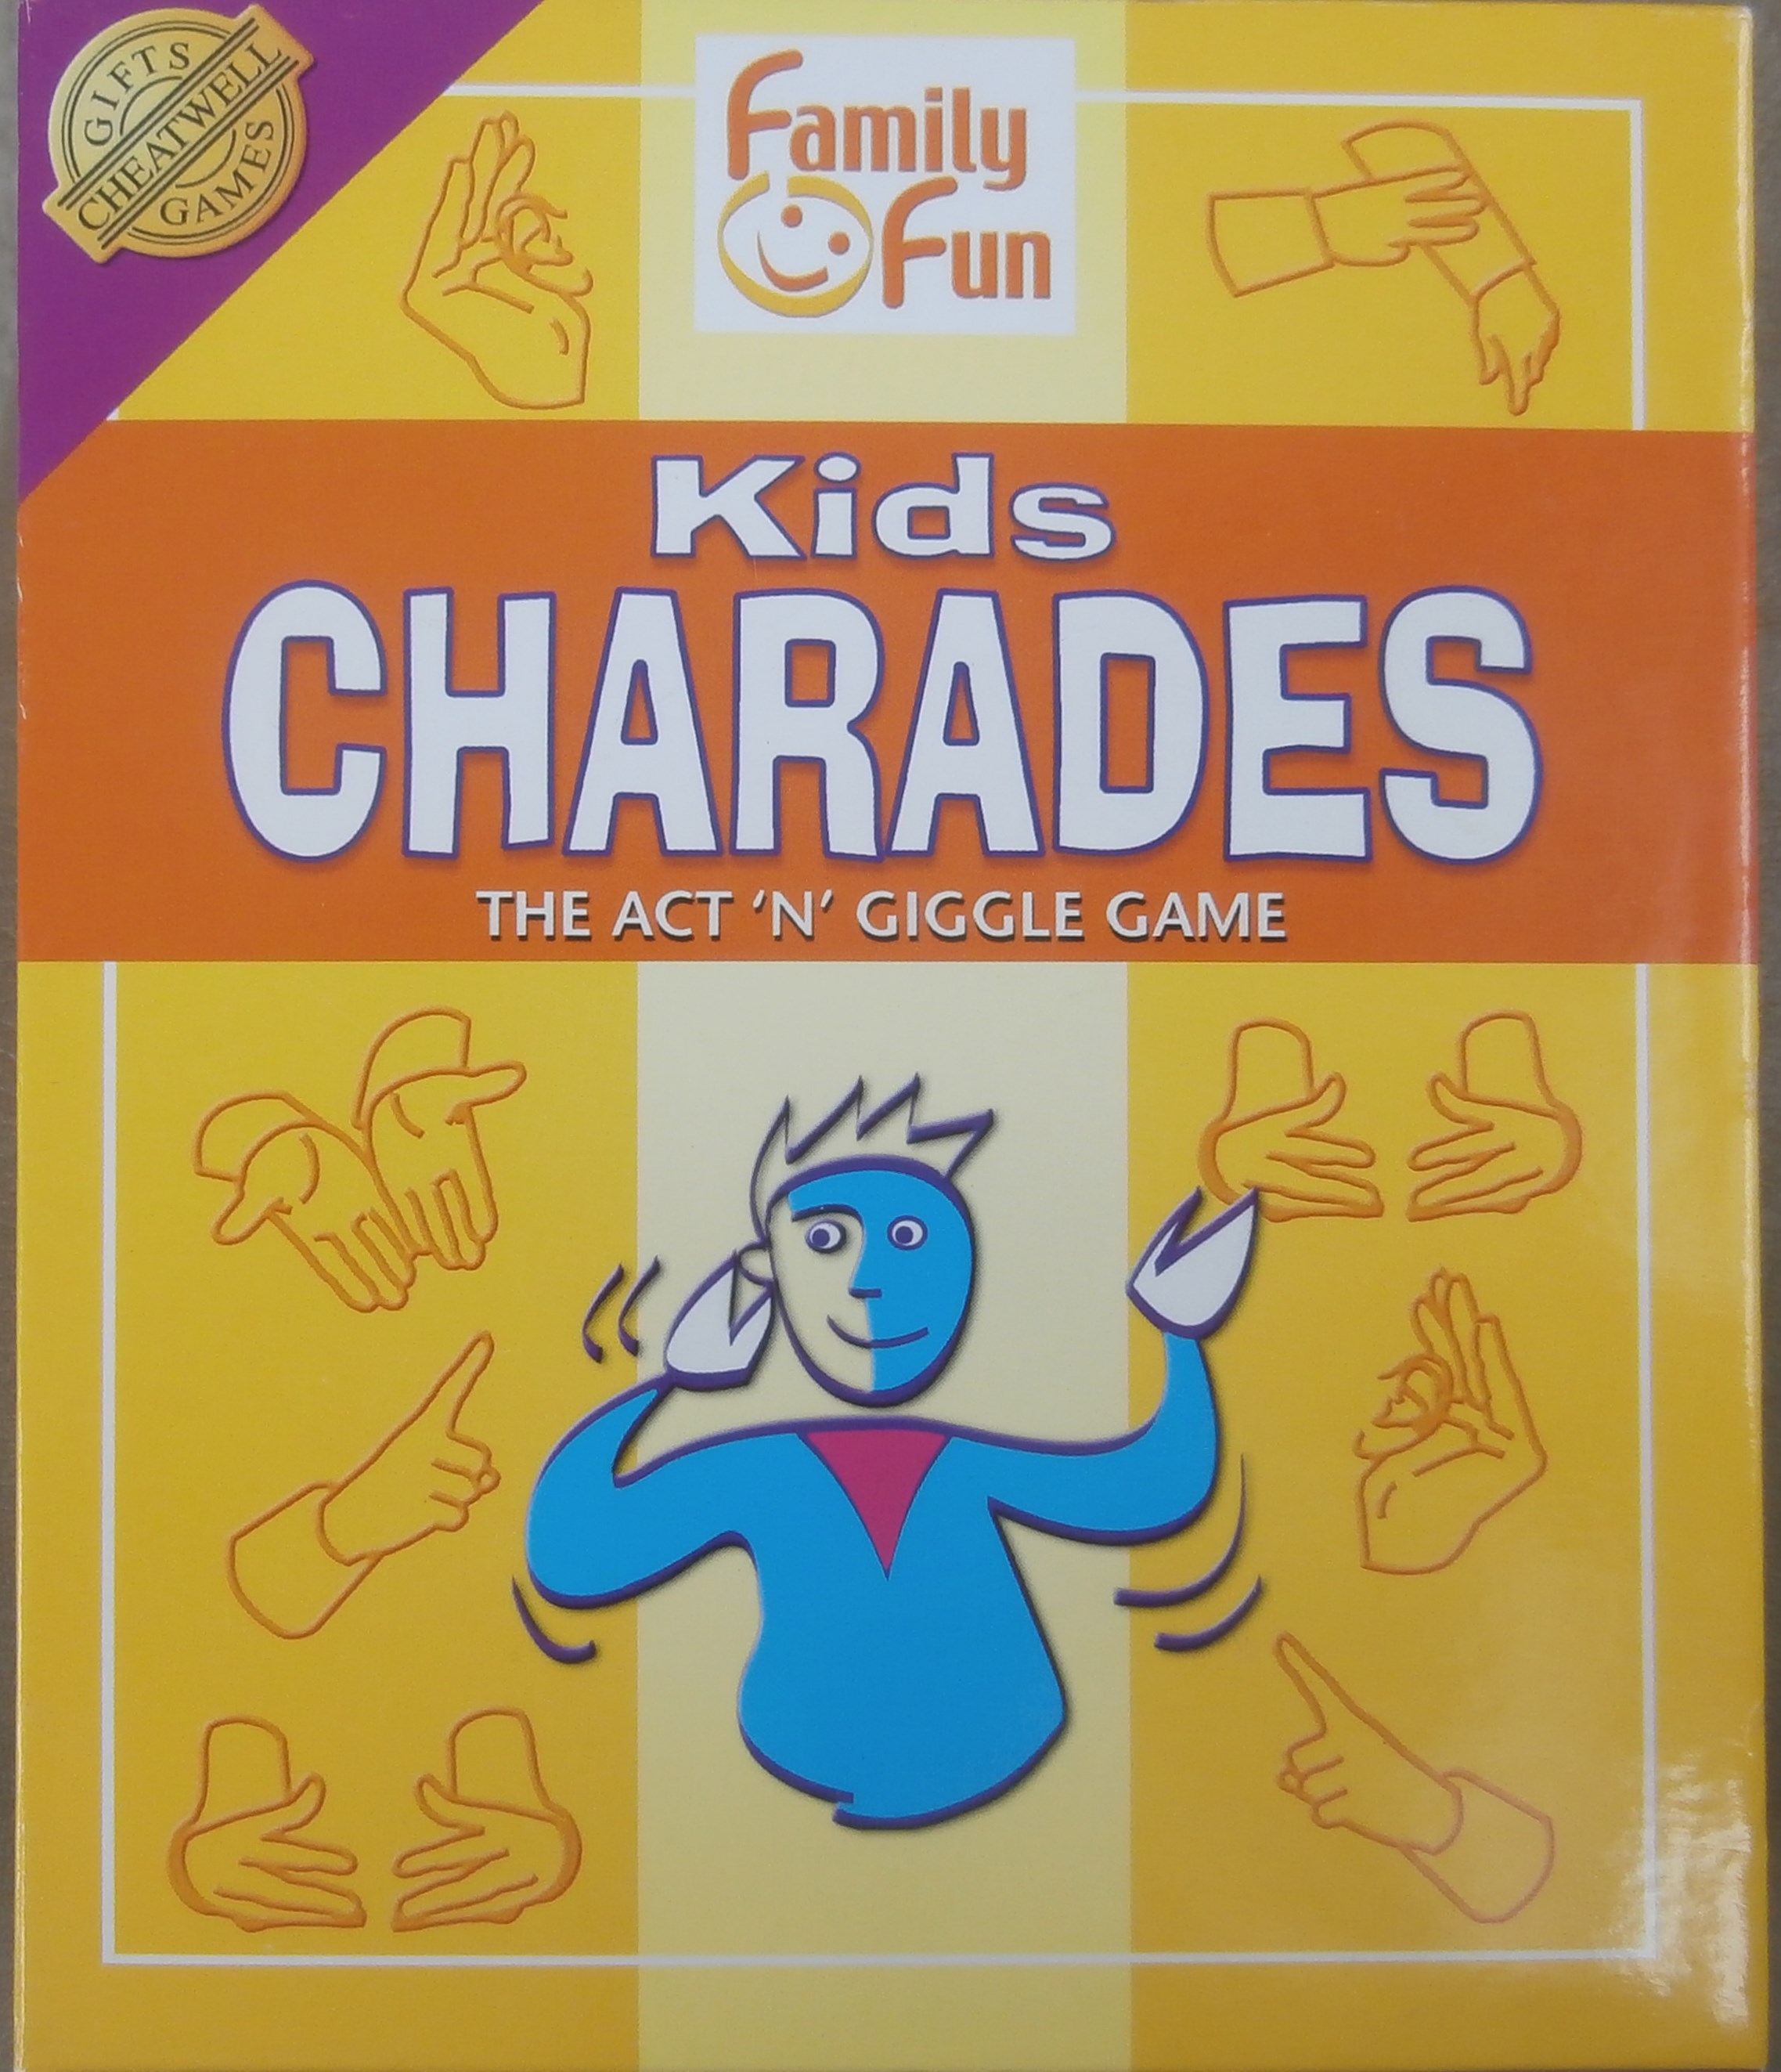 the-game-of-kids-charades-all-about-fun-and-games